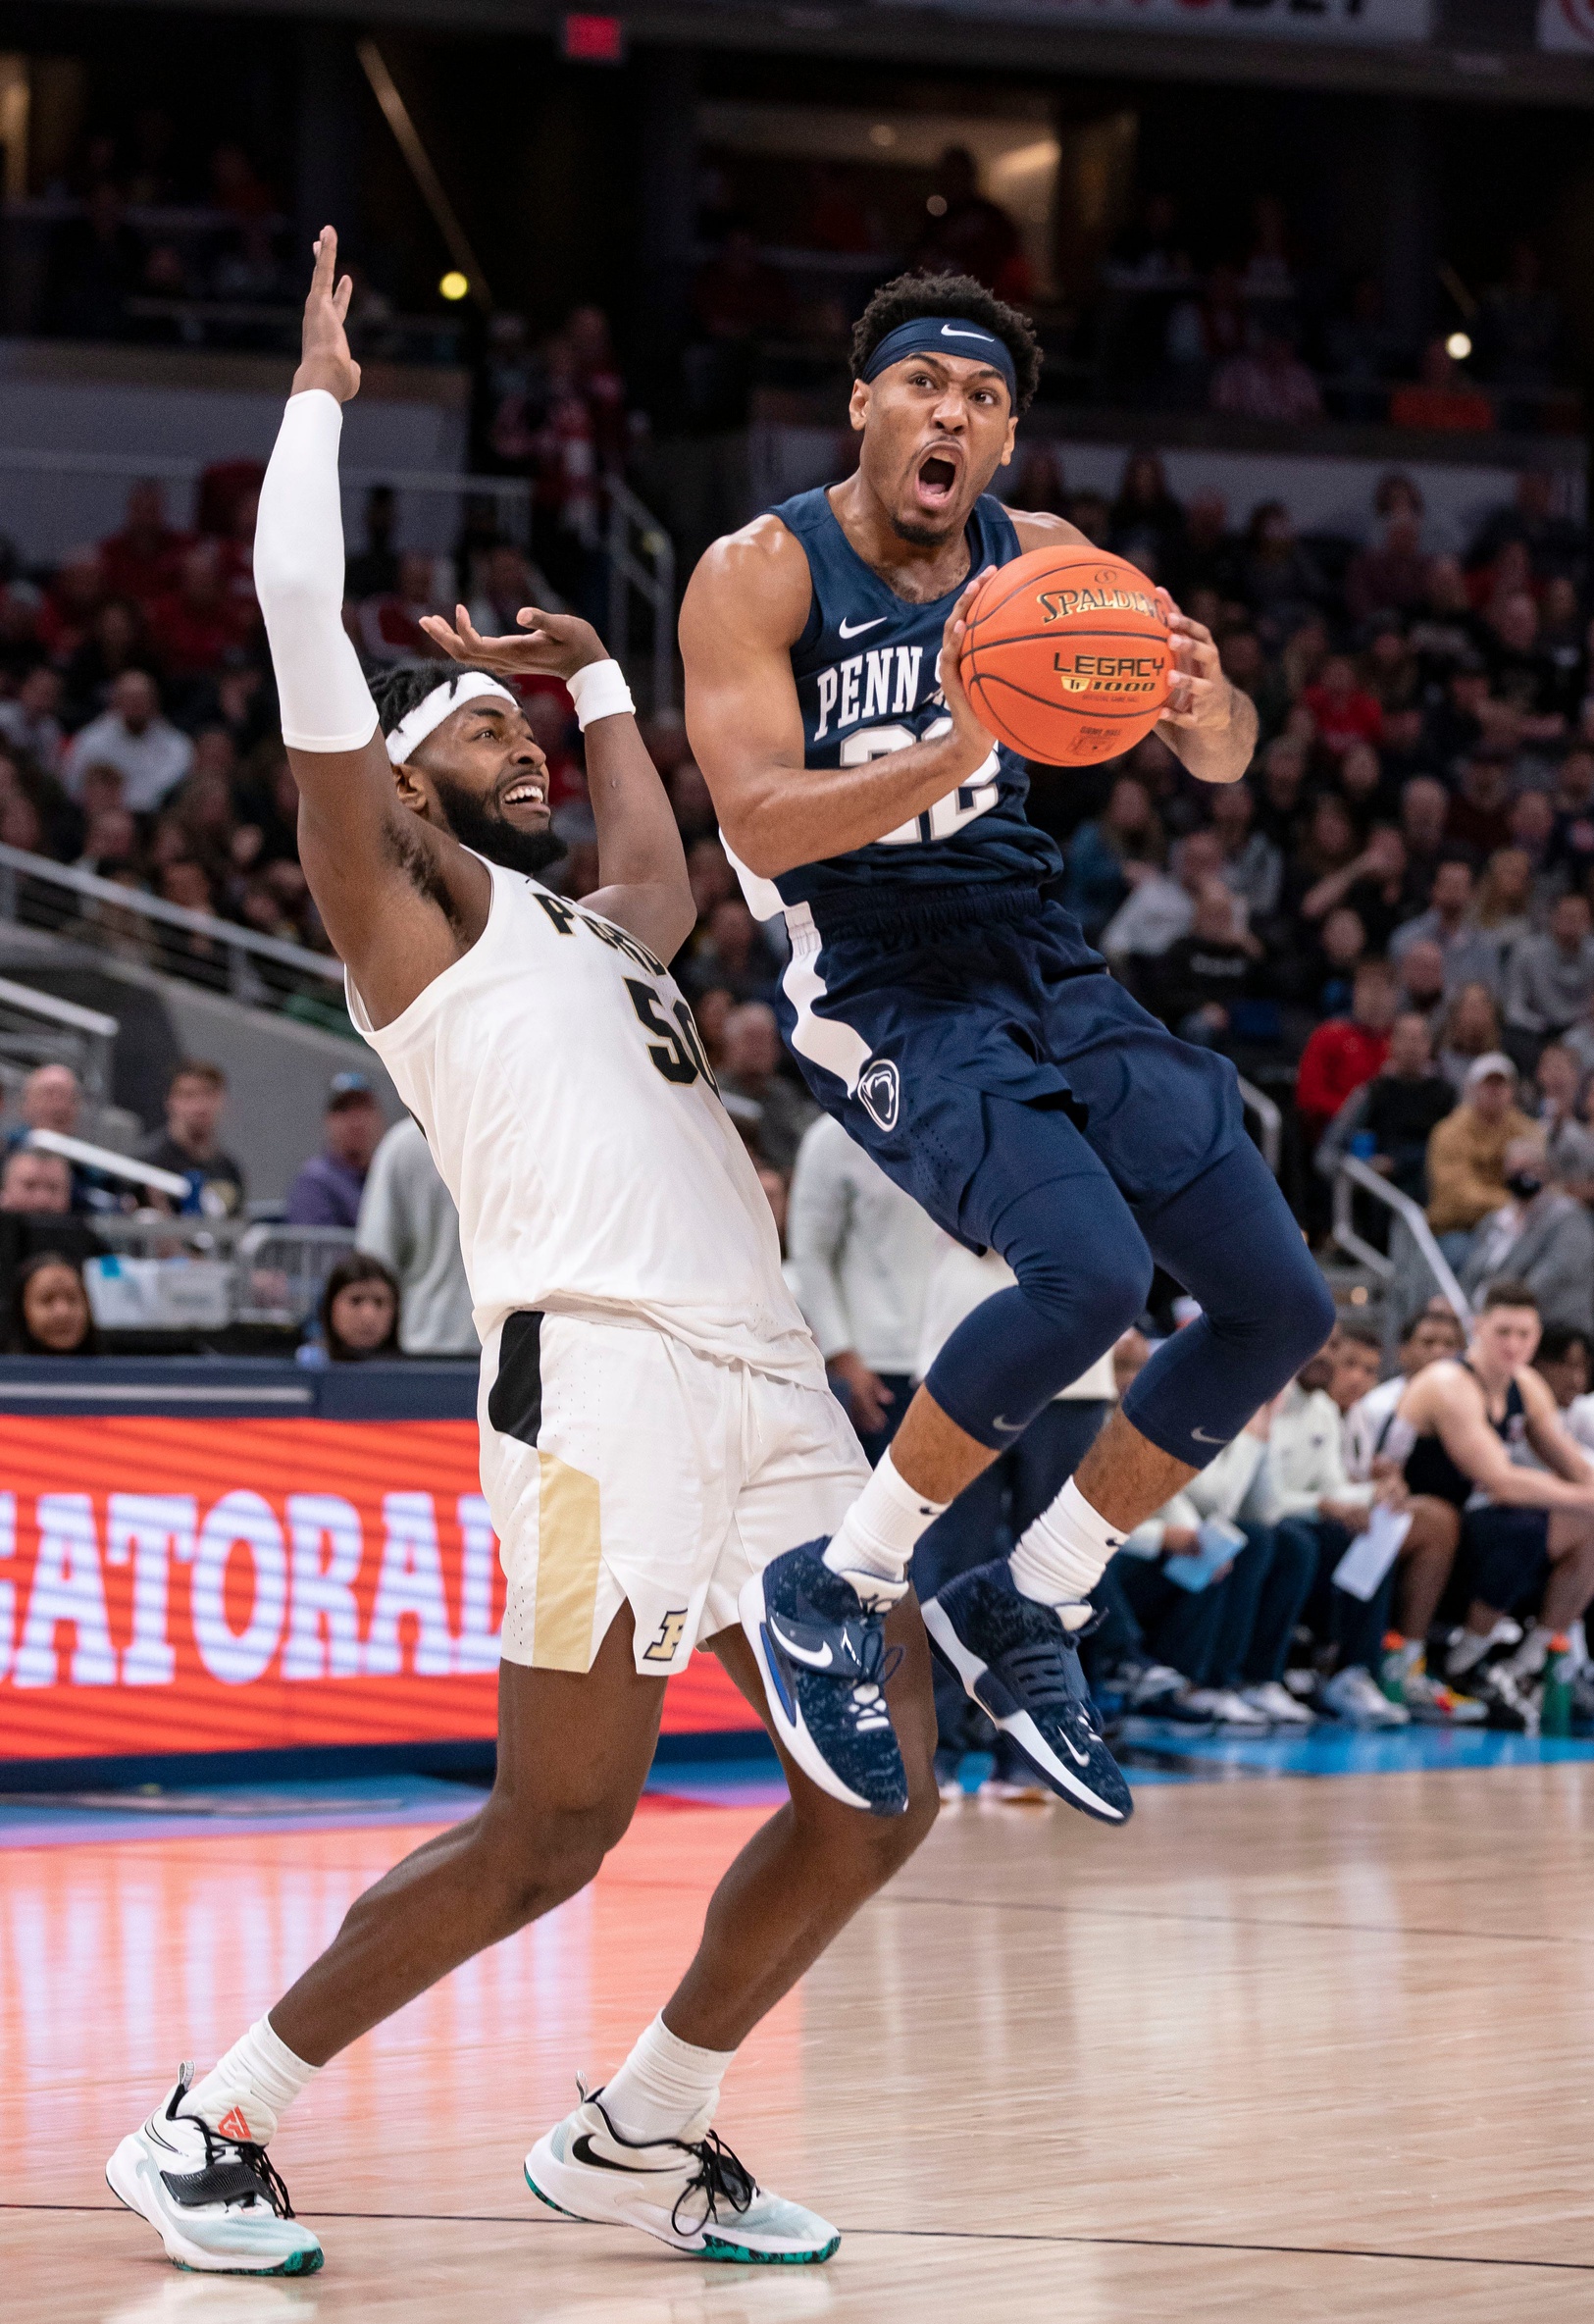 Furman Paladins vs Penn State Nittany Lions Prediction, 11/17/2022 College Basketball Picks, Best Bets & Odds